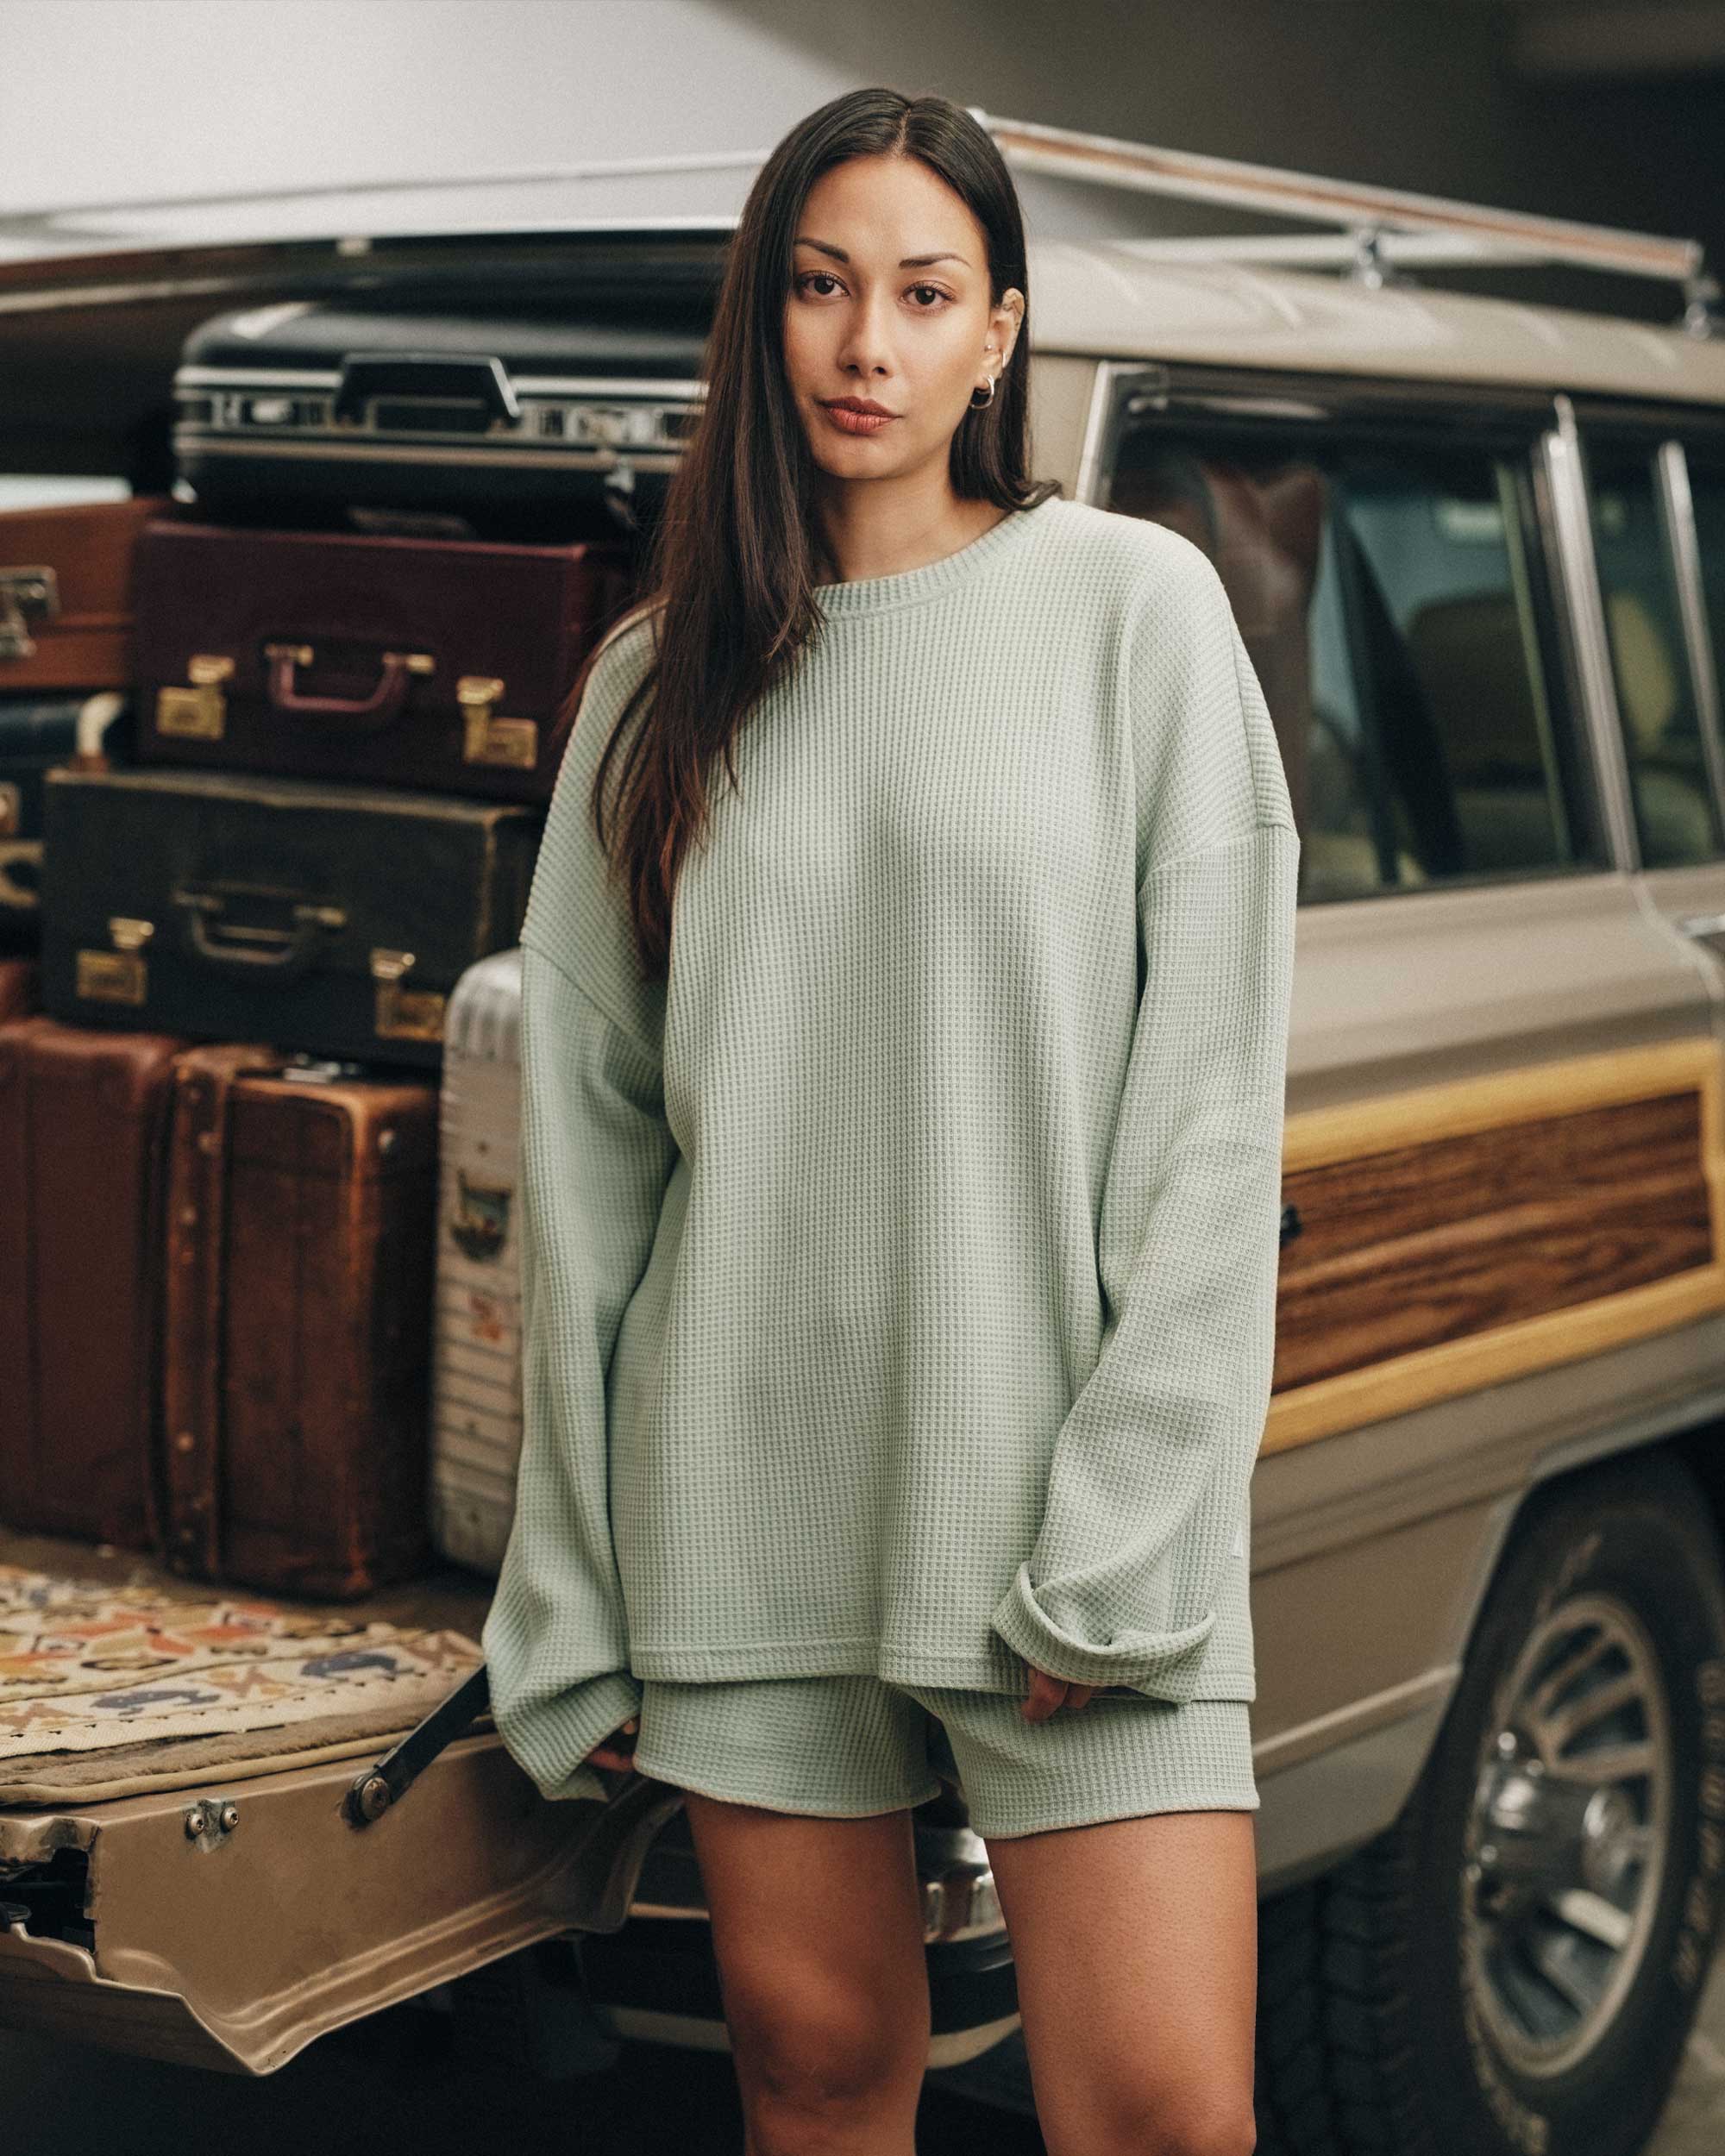 Female model wearing mint green waffle-patterned sweatshirt with a stitched-on material label.